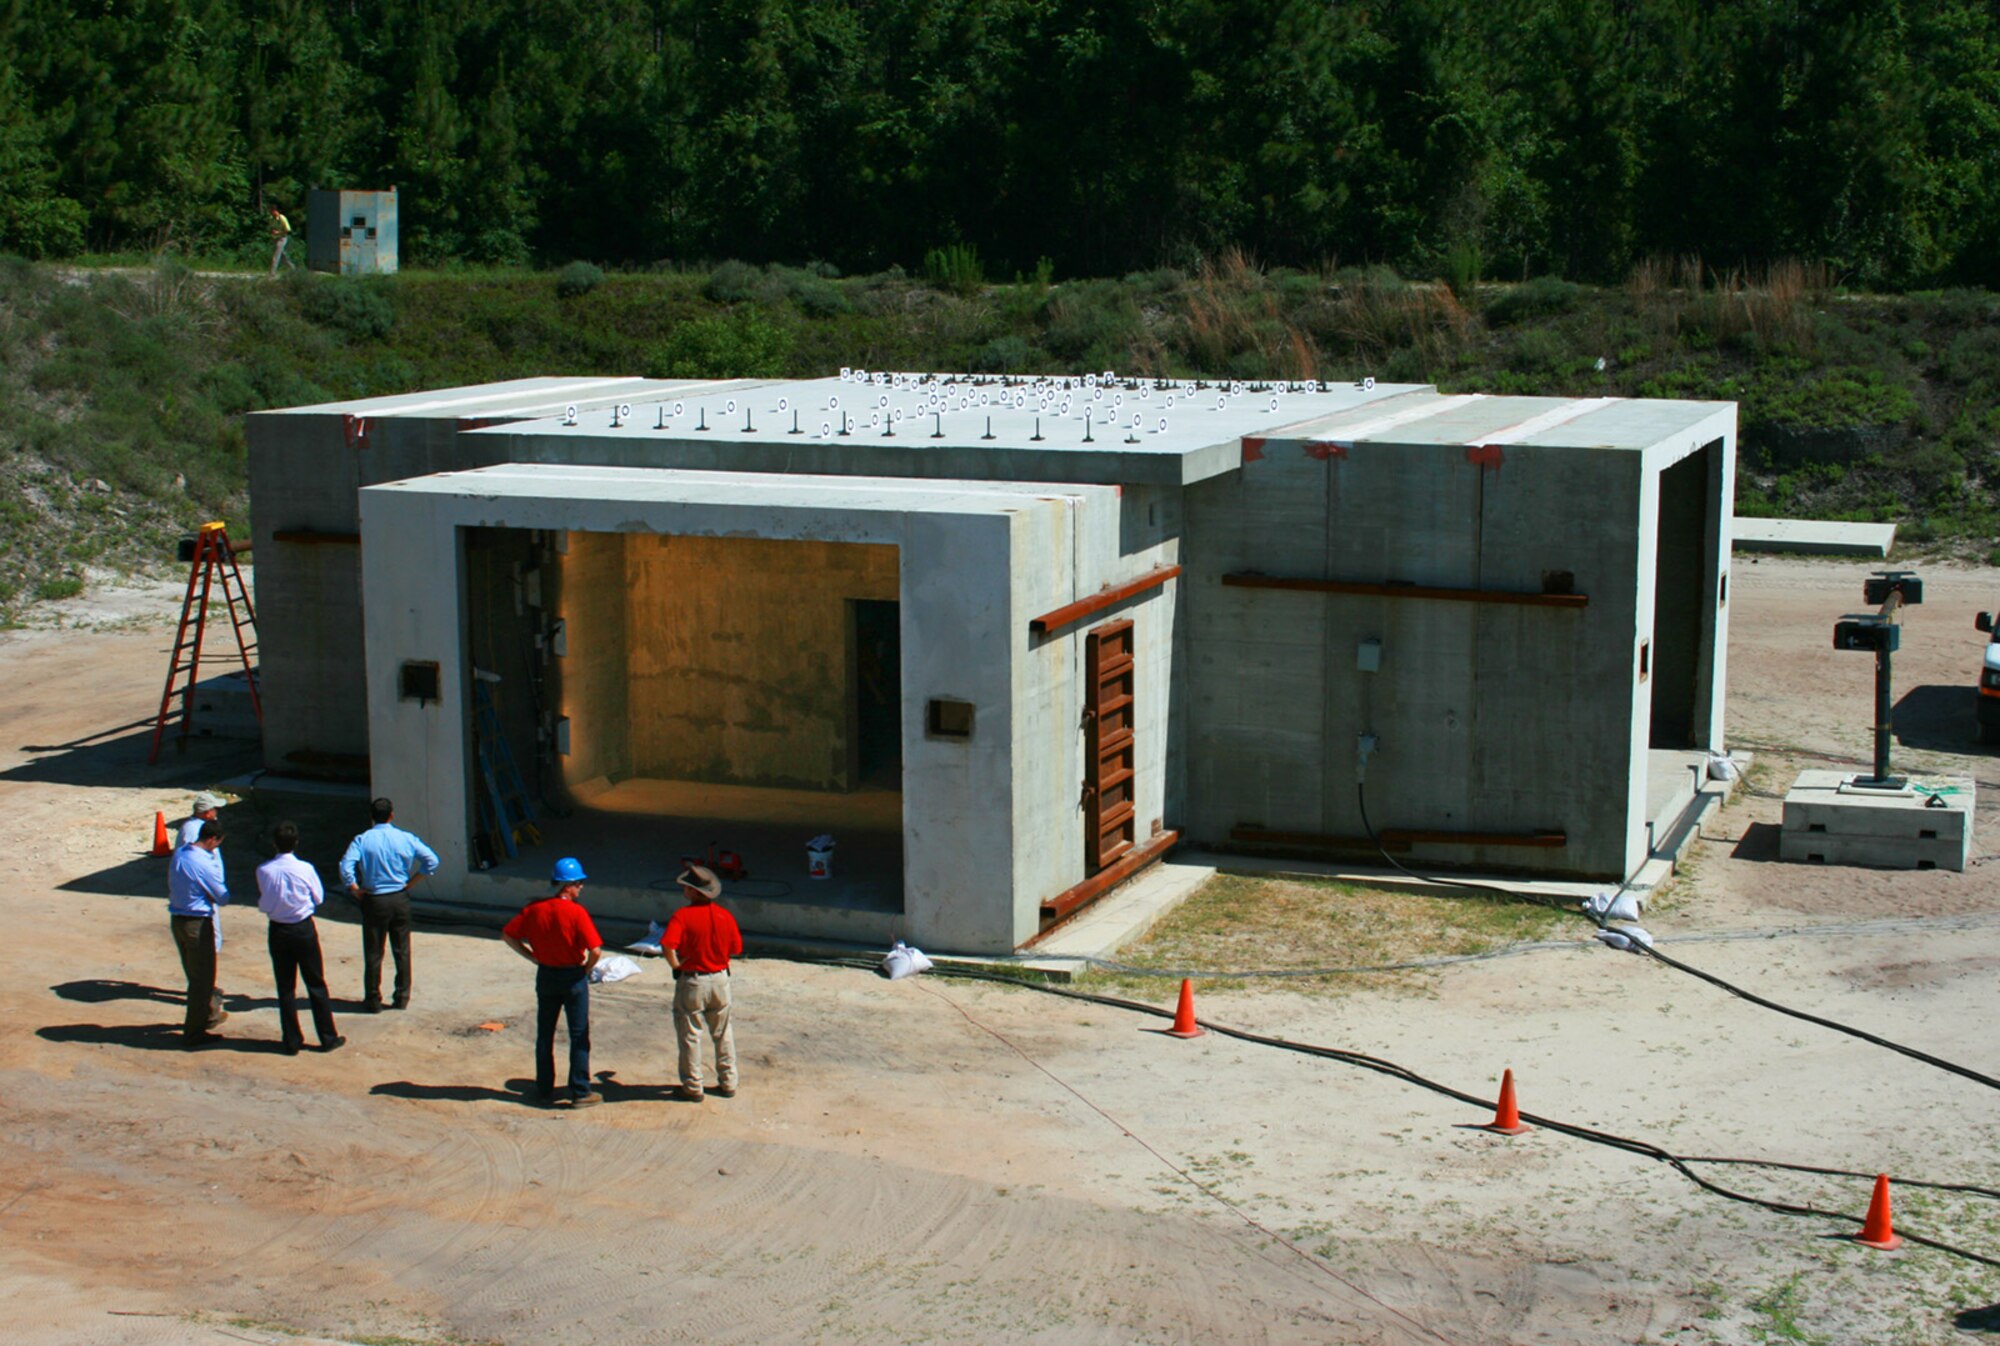 TYNDALL AIR FORCE BASE, Fla. – This blast shelter, previously managed by the Air Force Research Laboratory, is now part of the Air Force Civil Engineer Center’s new research and acquisition division. This unique facility is located at the Sky 10 area here, a 23-acre site used for explosive research. (U.S. Air Force photo/Dennis Foth)